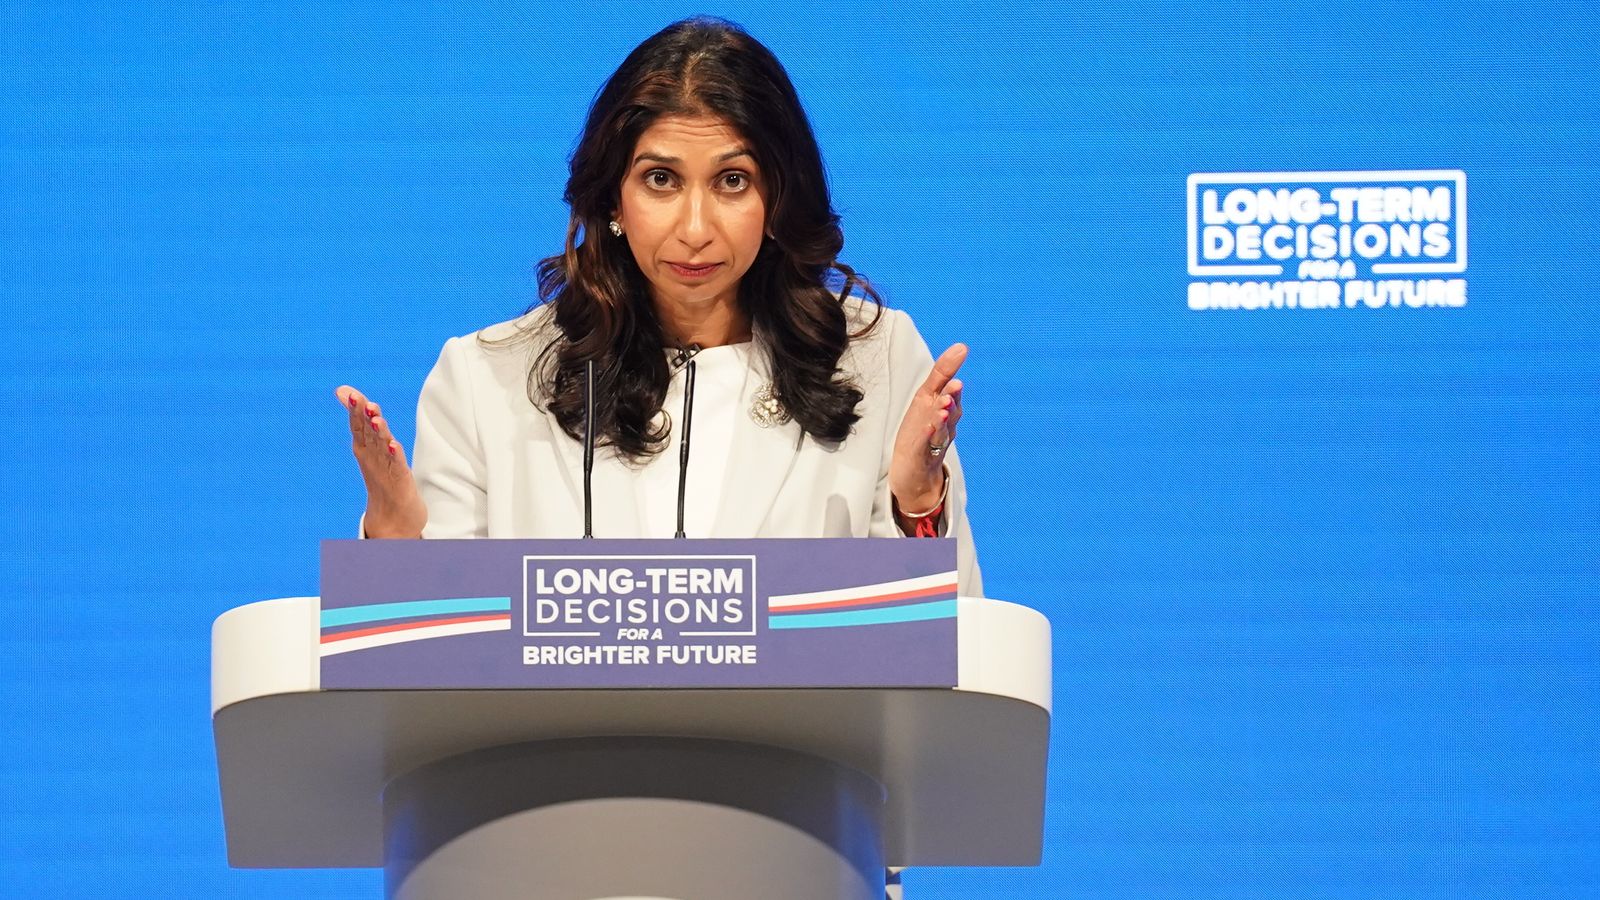 Suella Braverman undermining confidence in police and eroding trust in democracy, Tory MPs claim in leaked messages